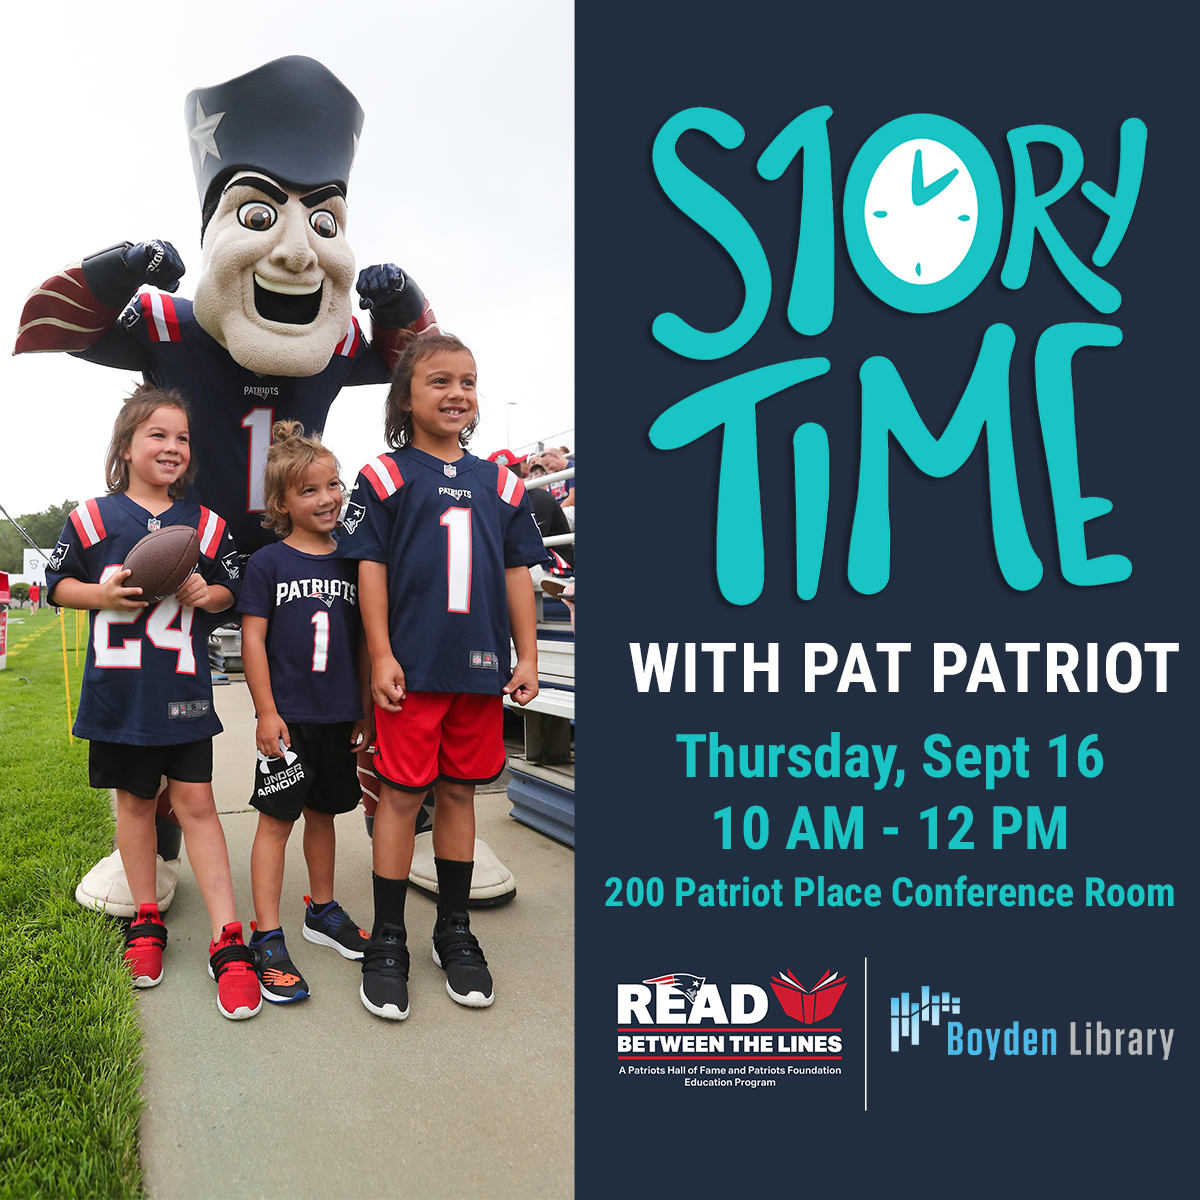 Storytime with Pat Patriot Thursday, Sept 16